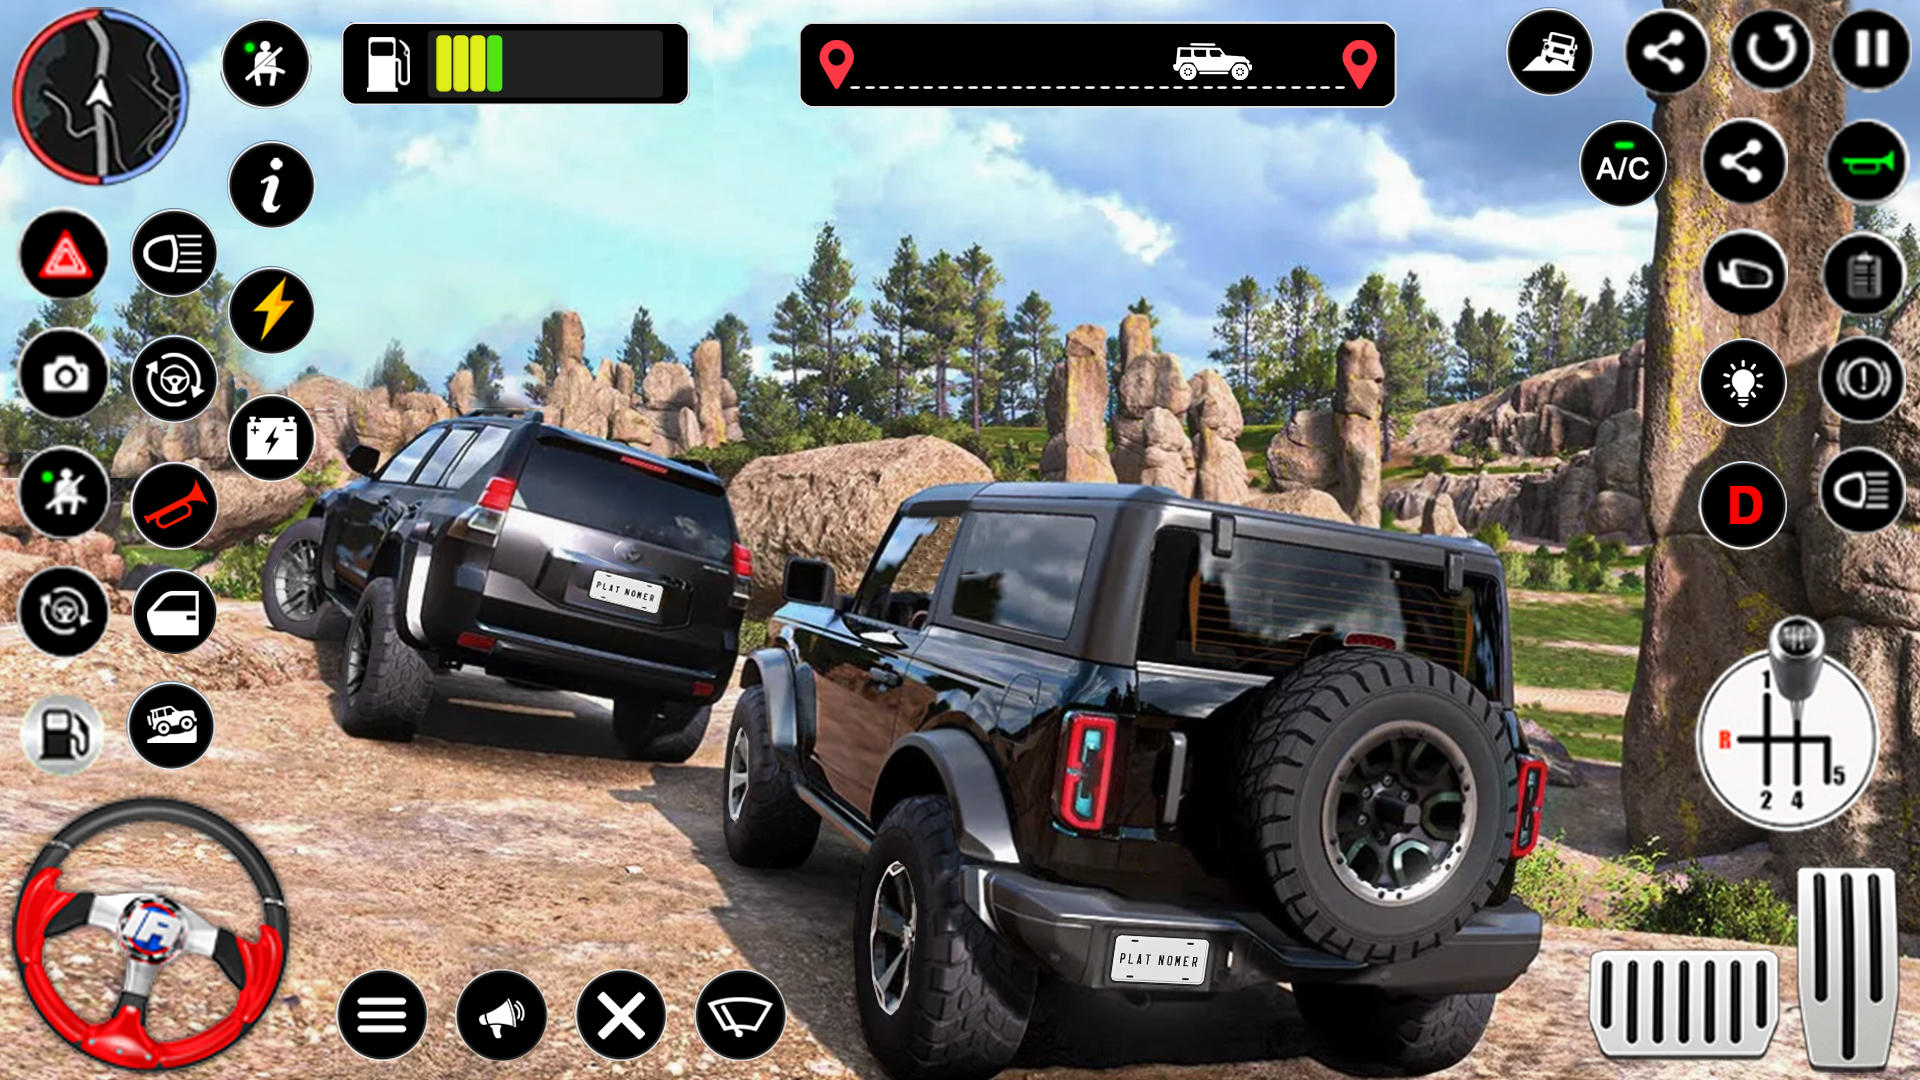 Screenshot of Offroad Jeep Driving Thar Game